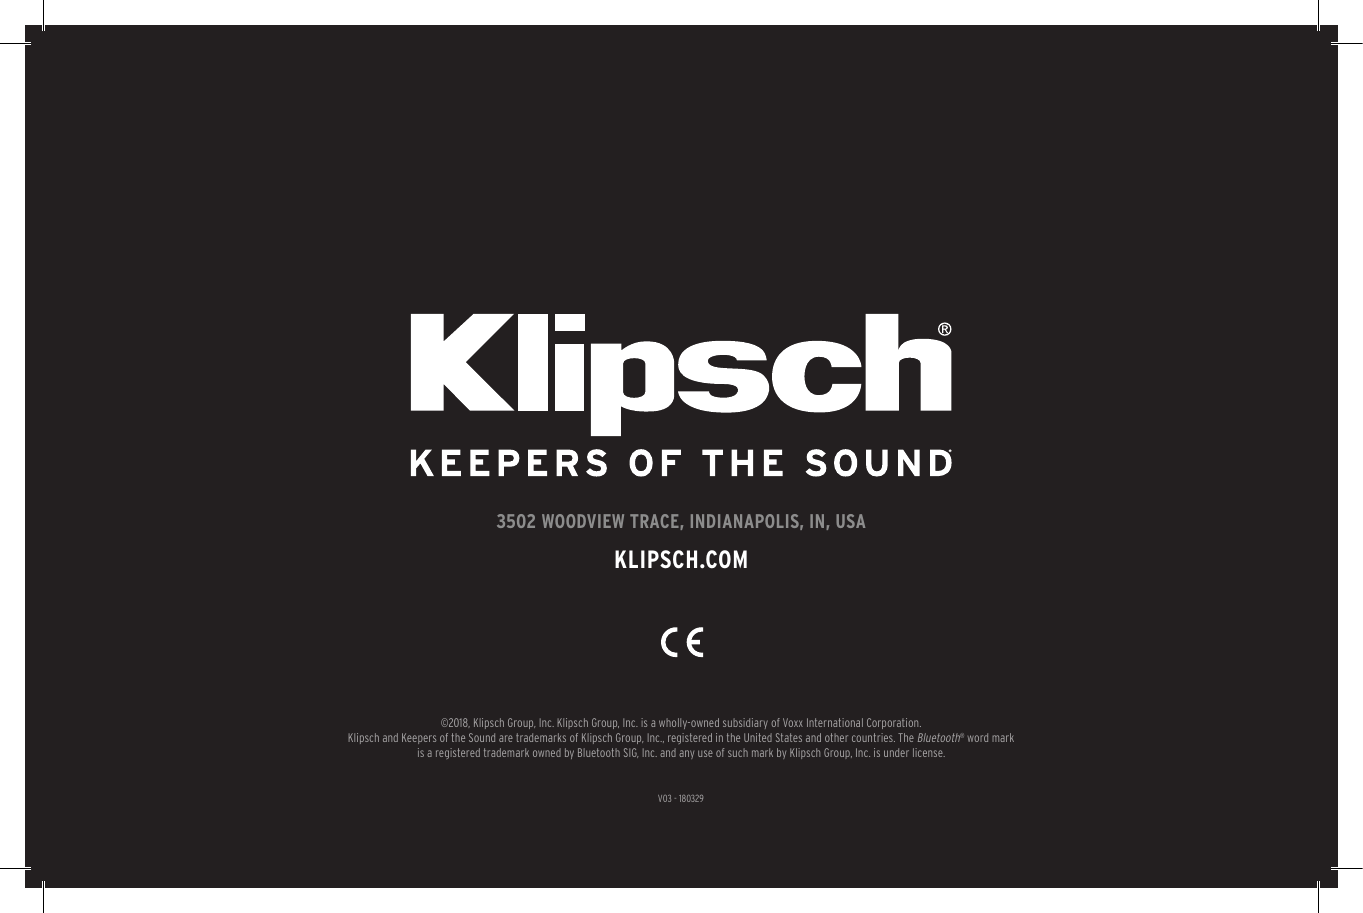 44 V03 - 1803293502 WOODVIEW TRACE, INDIANAPOLIS, IN, USAKLIPSCH.COM©2018, Klipsch Group, Inc. Klipsch Group, Inc. is a wholly-owned subsidiary of Voxx International Corporation.Klipsch and Keepers of the Sound are trademarks of Klipsch Group, Inc., registered in the United States and other countries. The Bluetooth® word mark is a registered trademark owned by Bluetooth SIG, Inc. and any use of such mark by Klipsch Group, Inc. is under license. 